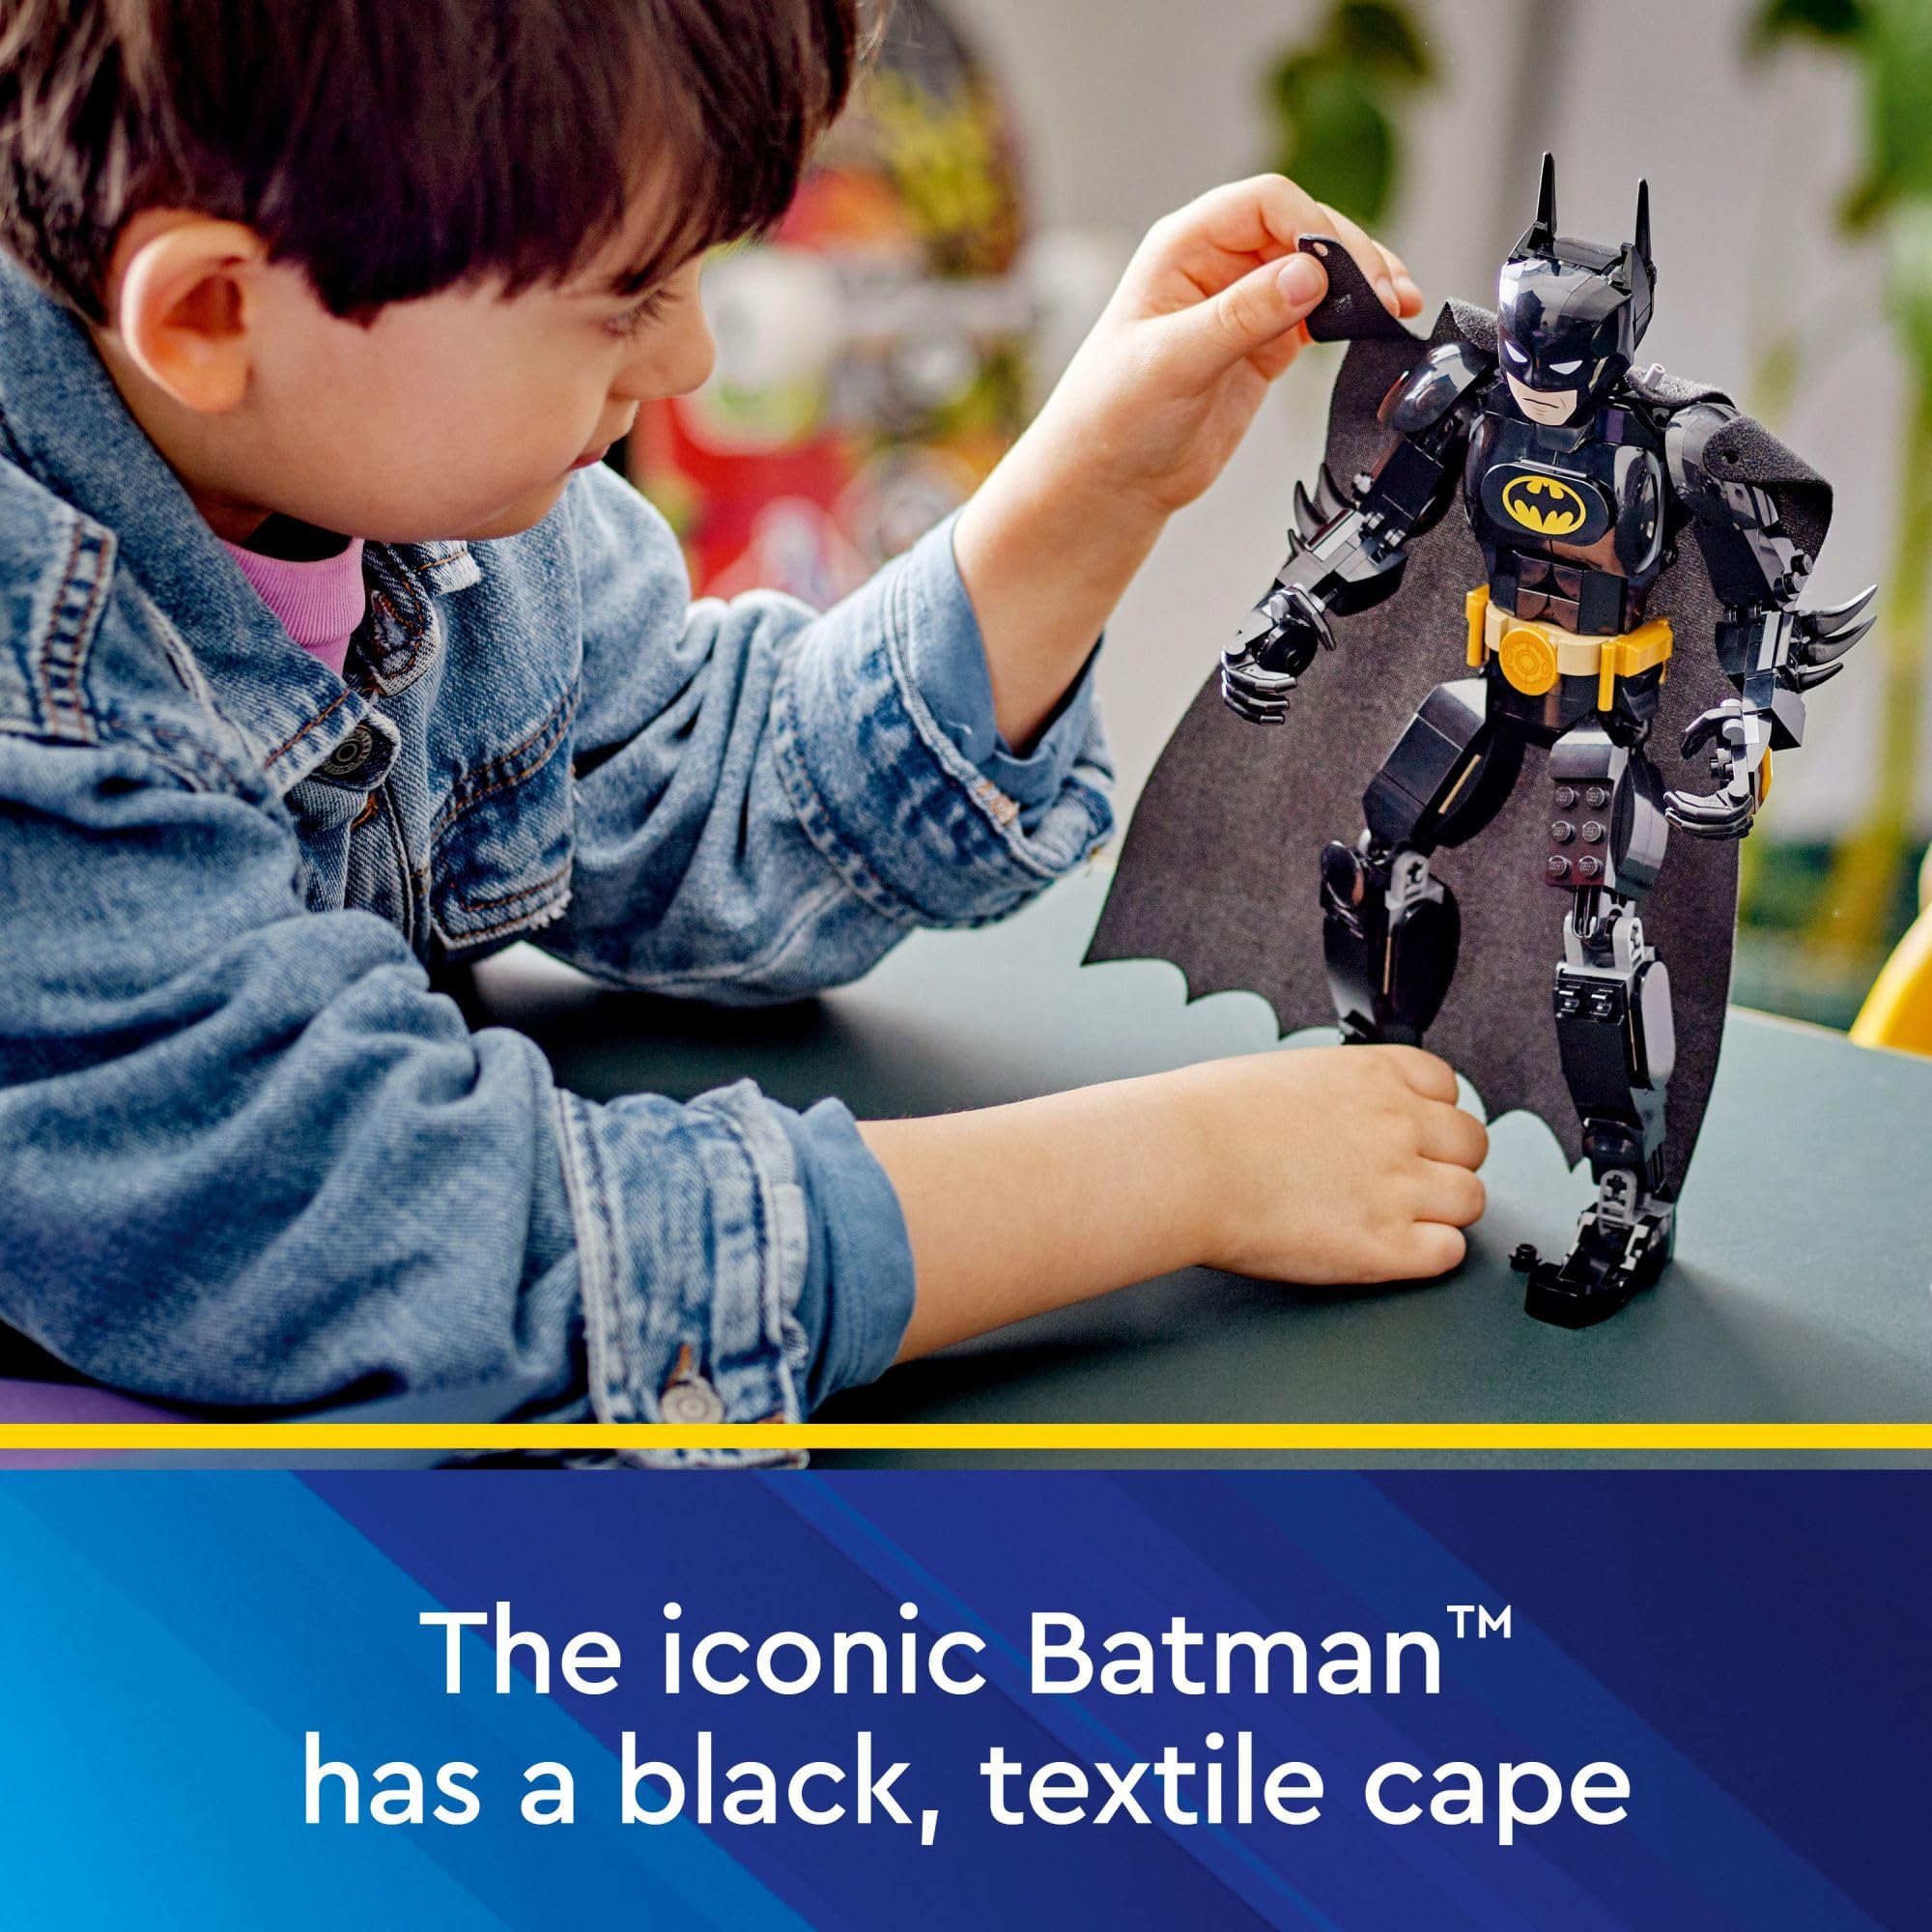 LEGO DC Batman Construction Figure 76259 Buildable DC Action Figure, Fully Jointed DC Toy for Play and Display with Cape and Authentic Details from the Batman Returns Movie, Batman Toy for 8 Year Olds